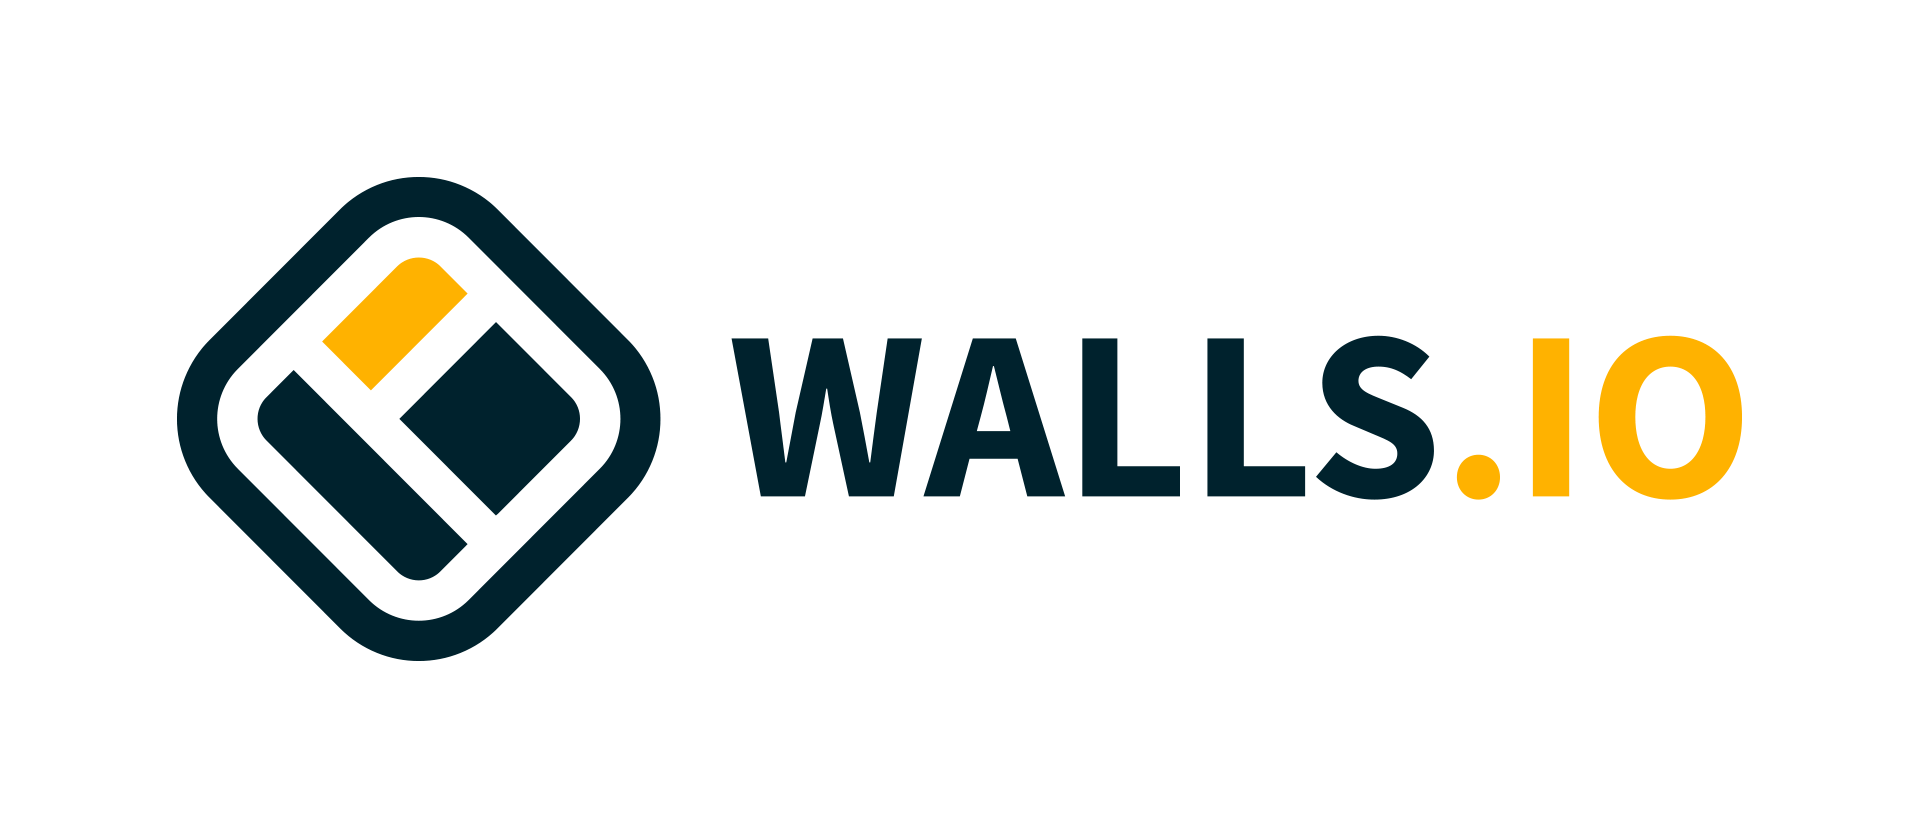 Wall -E Logo - The Social Wall for Your Hashtag Campaign